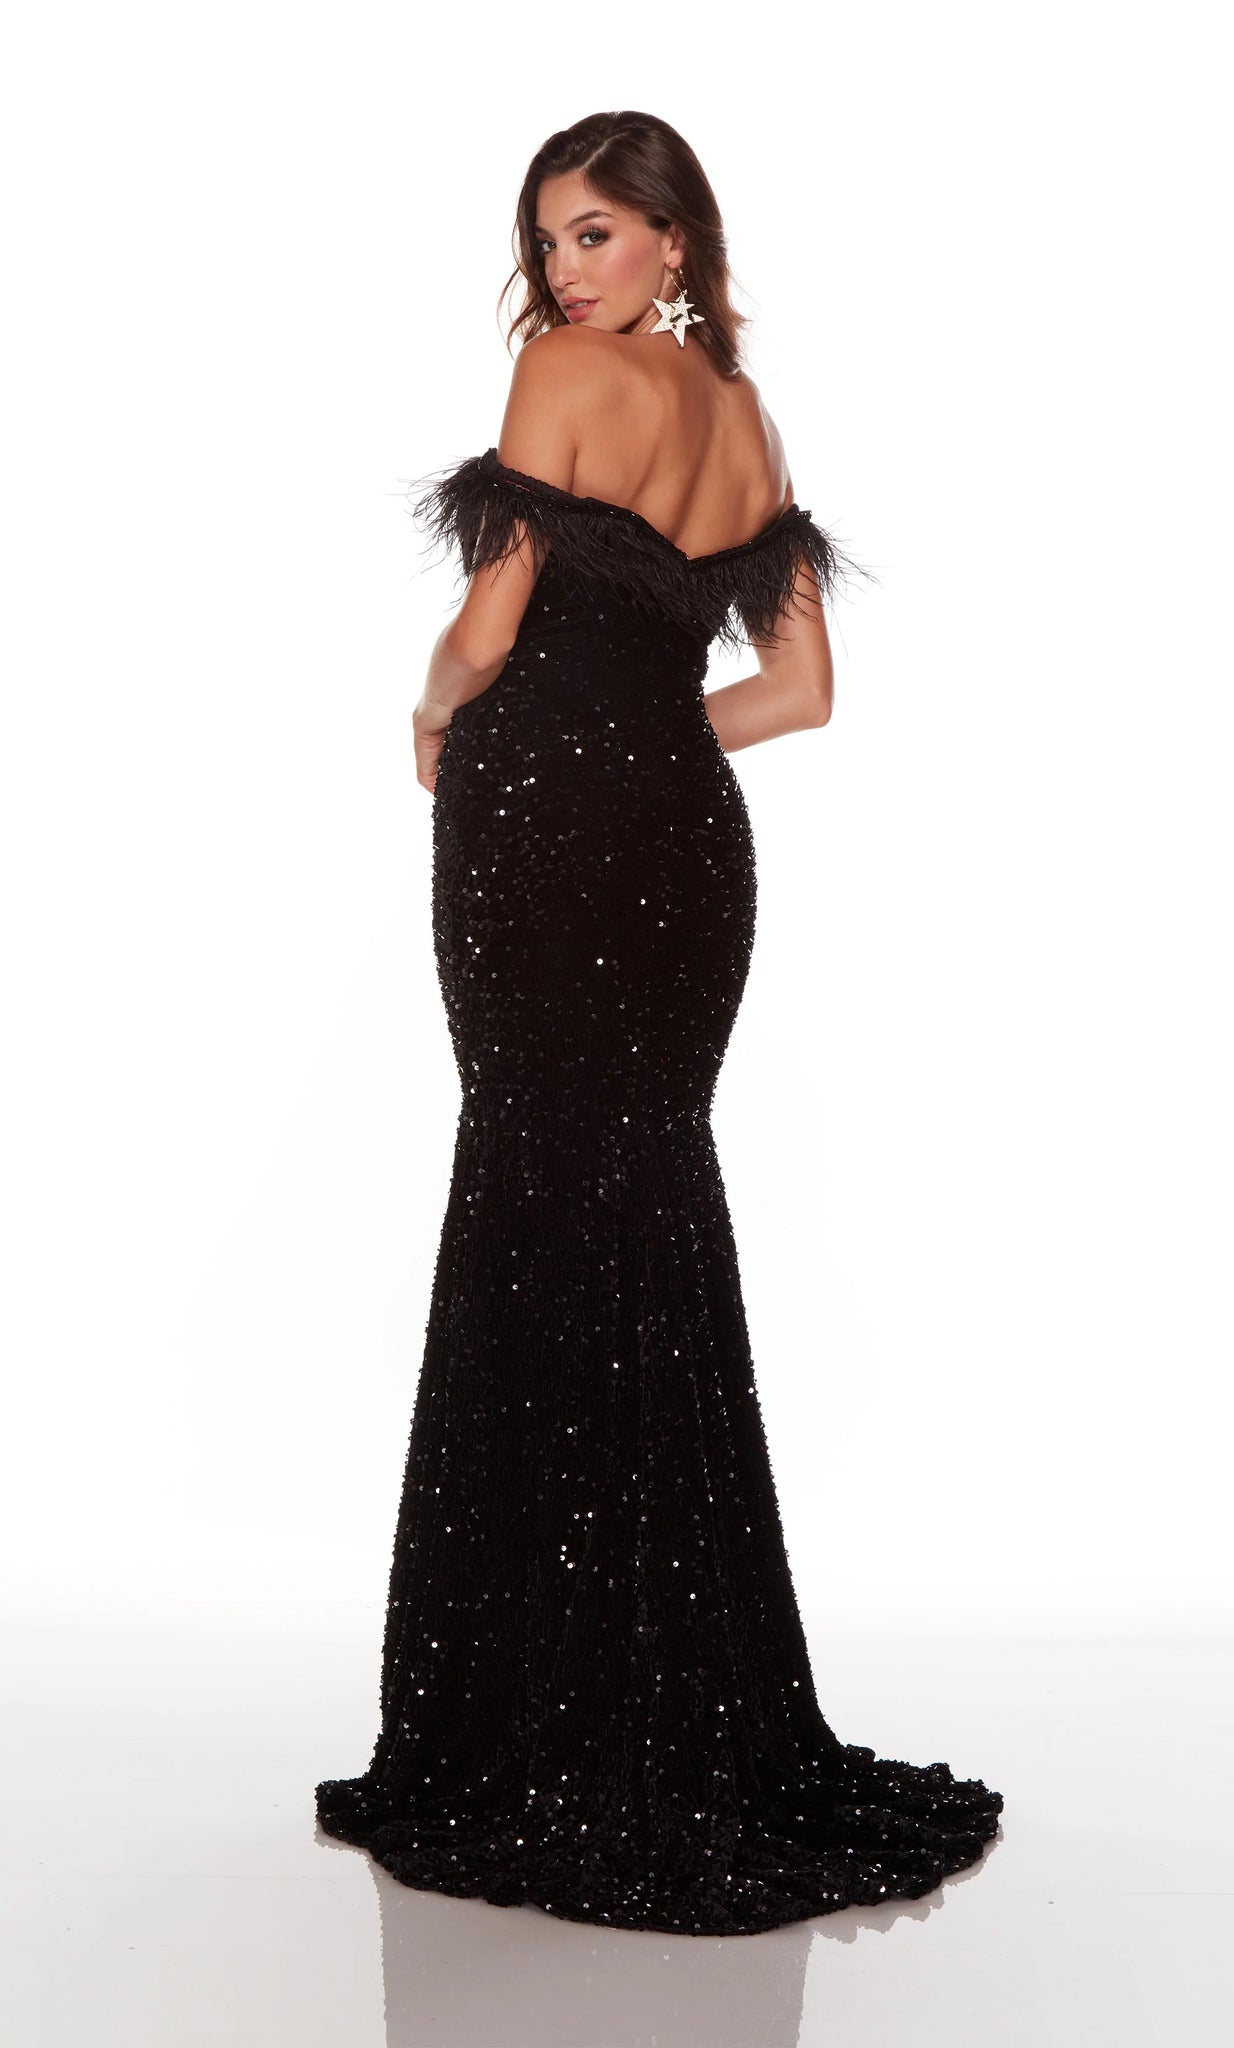 This Alyce Paris 61373 black long party dress is crafted in plush sequins, with ostrich feathers and beaded trims along the plunging off-the-shoulder neckline. This sparkly slim prom gown exits with a semi-open back and a sweep train.